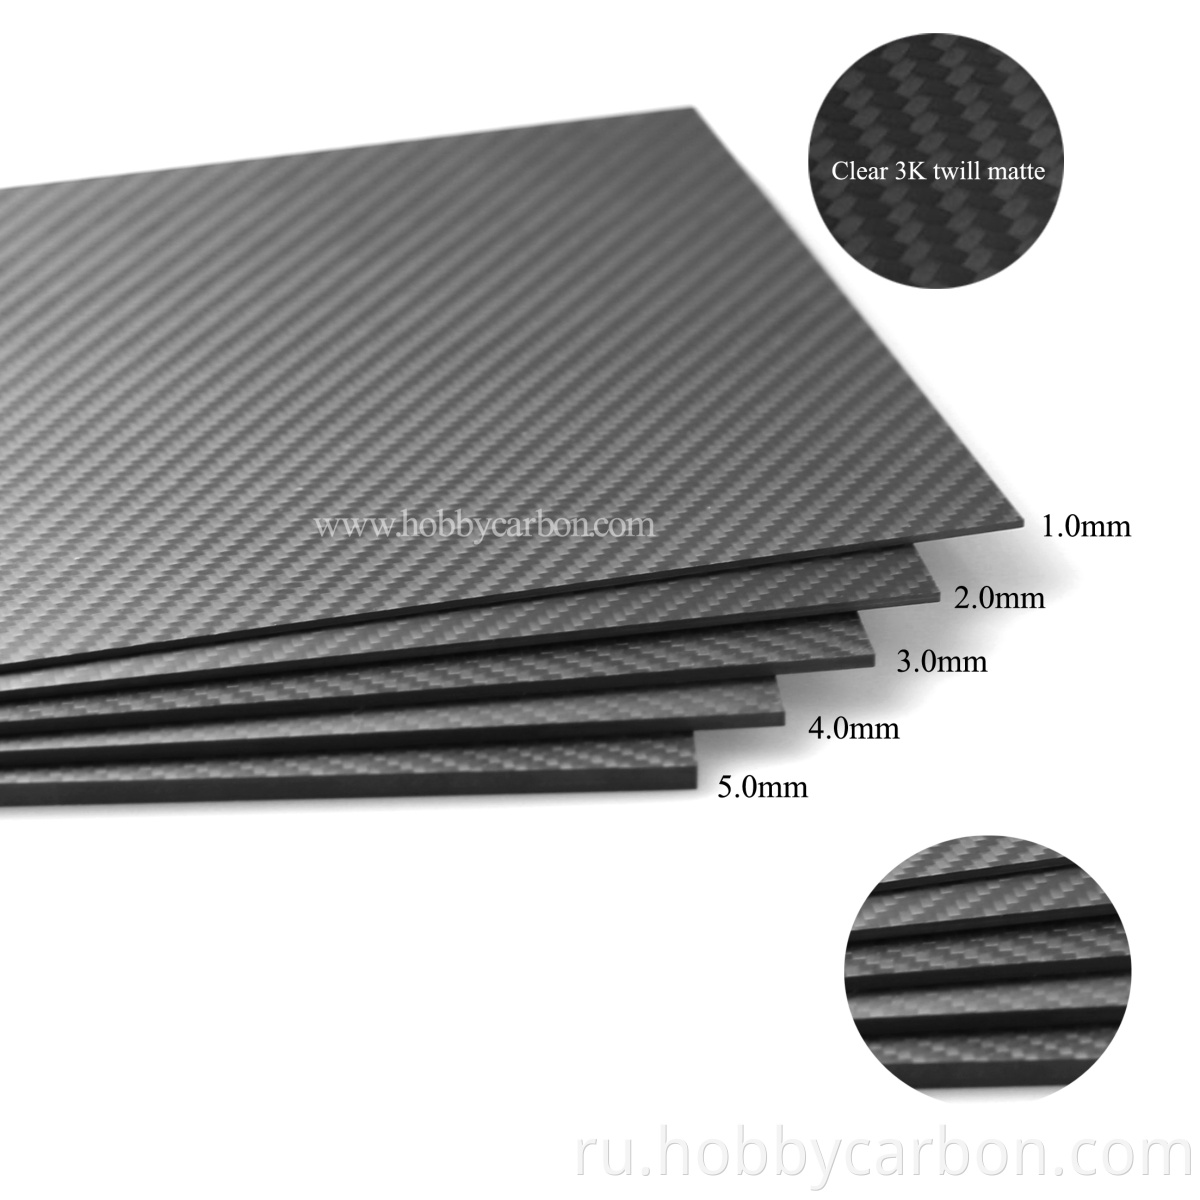 differenct thickness 3k carbon fiber sheet 